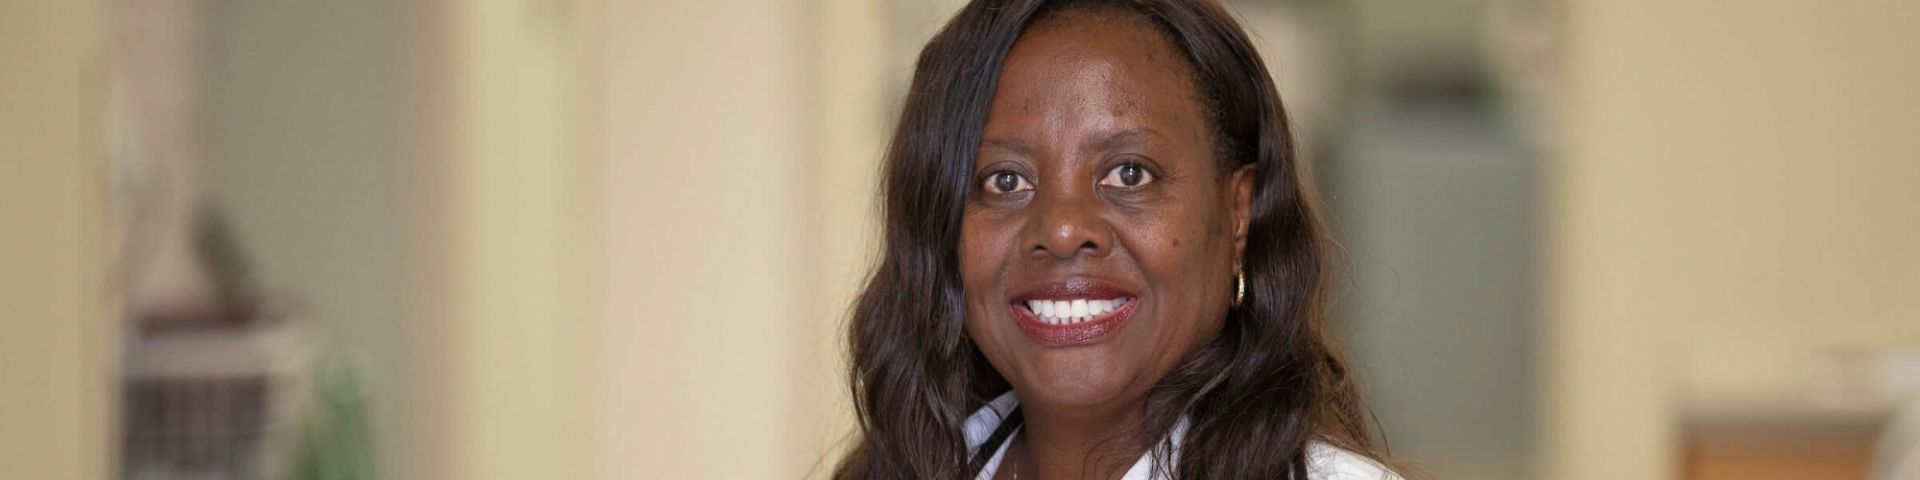 USA Health sickle cell leader appointed to state regulatory commission